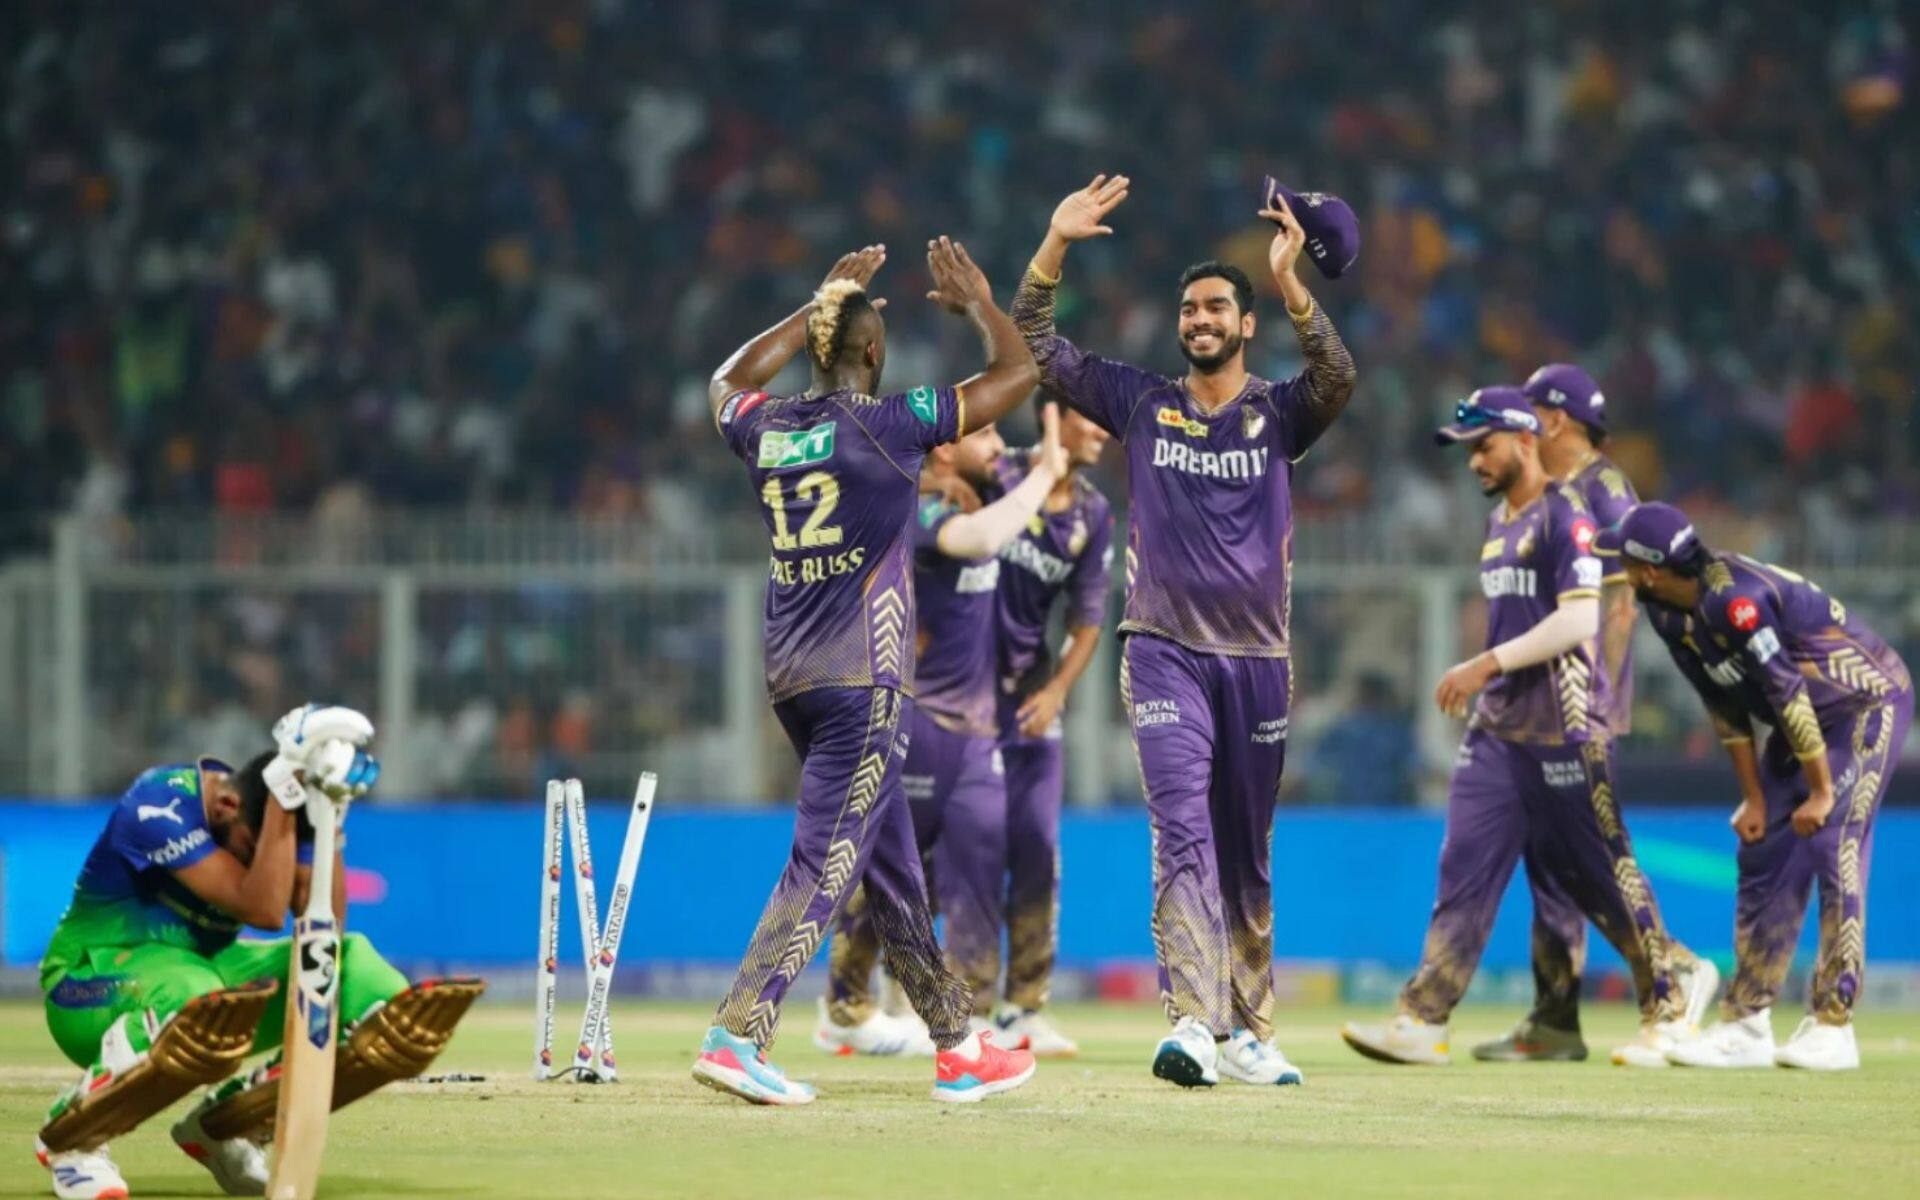 KKR players celebrating their one-run win over RCB (BCCI)